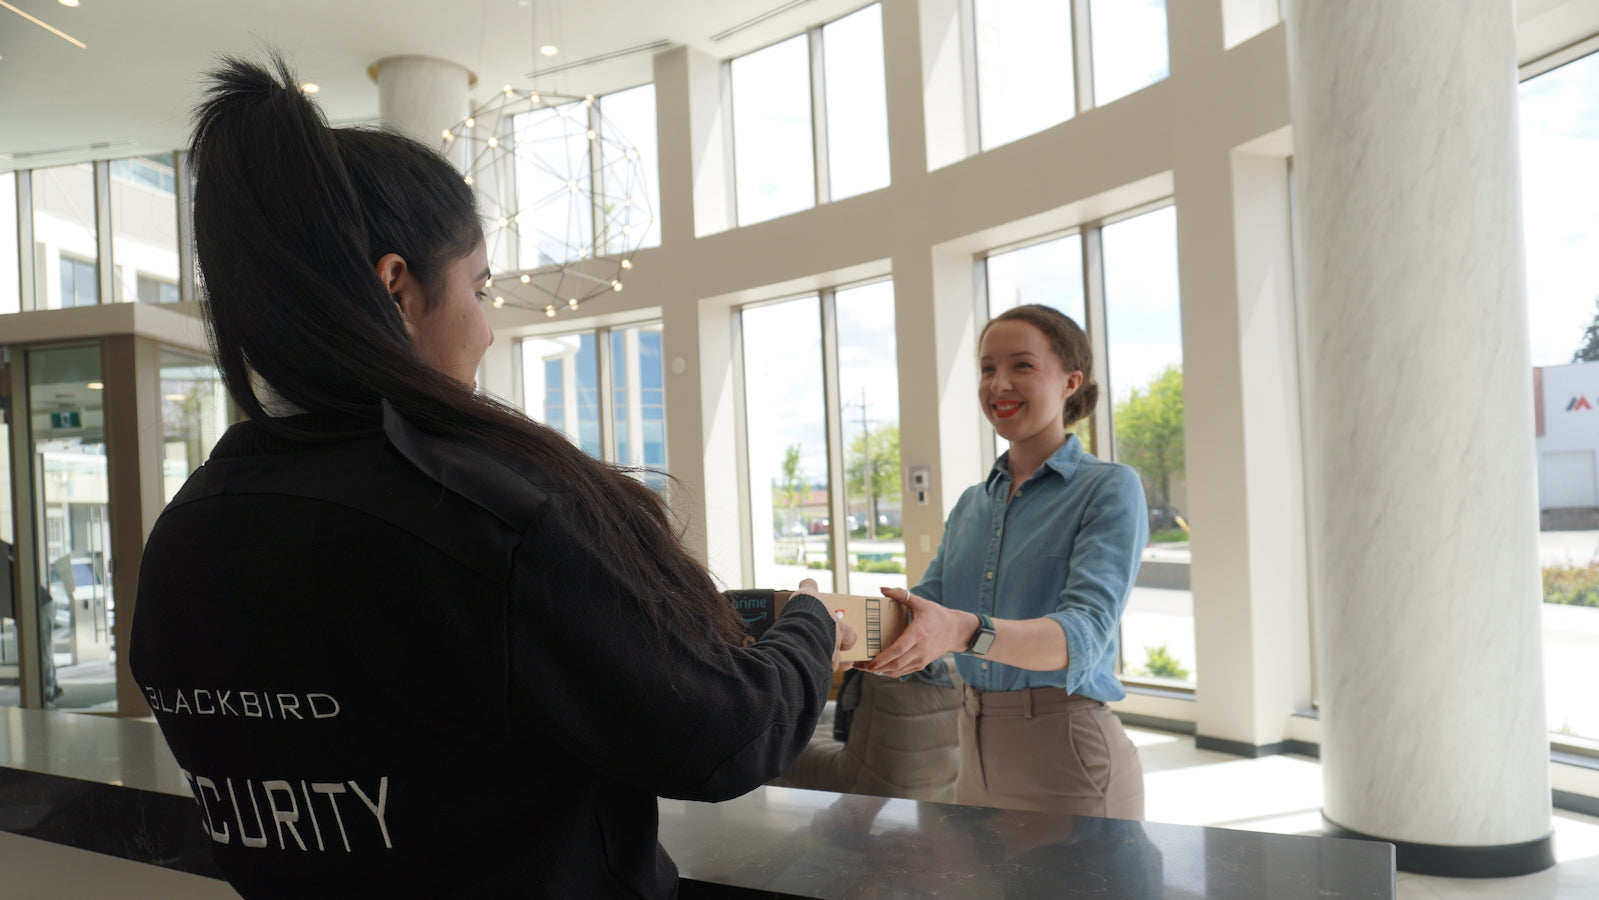 A Blackbird Concierge Security person with long hair is handing a package to a person on the other side of the counter. They are in a large foyer with a large pillar and windows behind them.